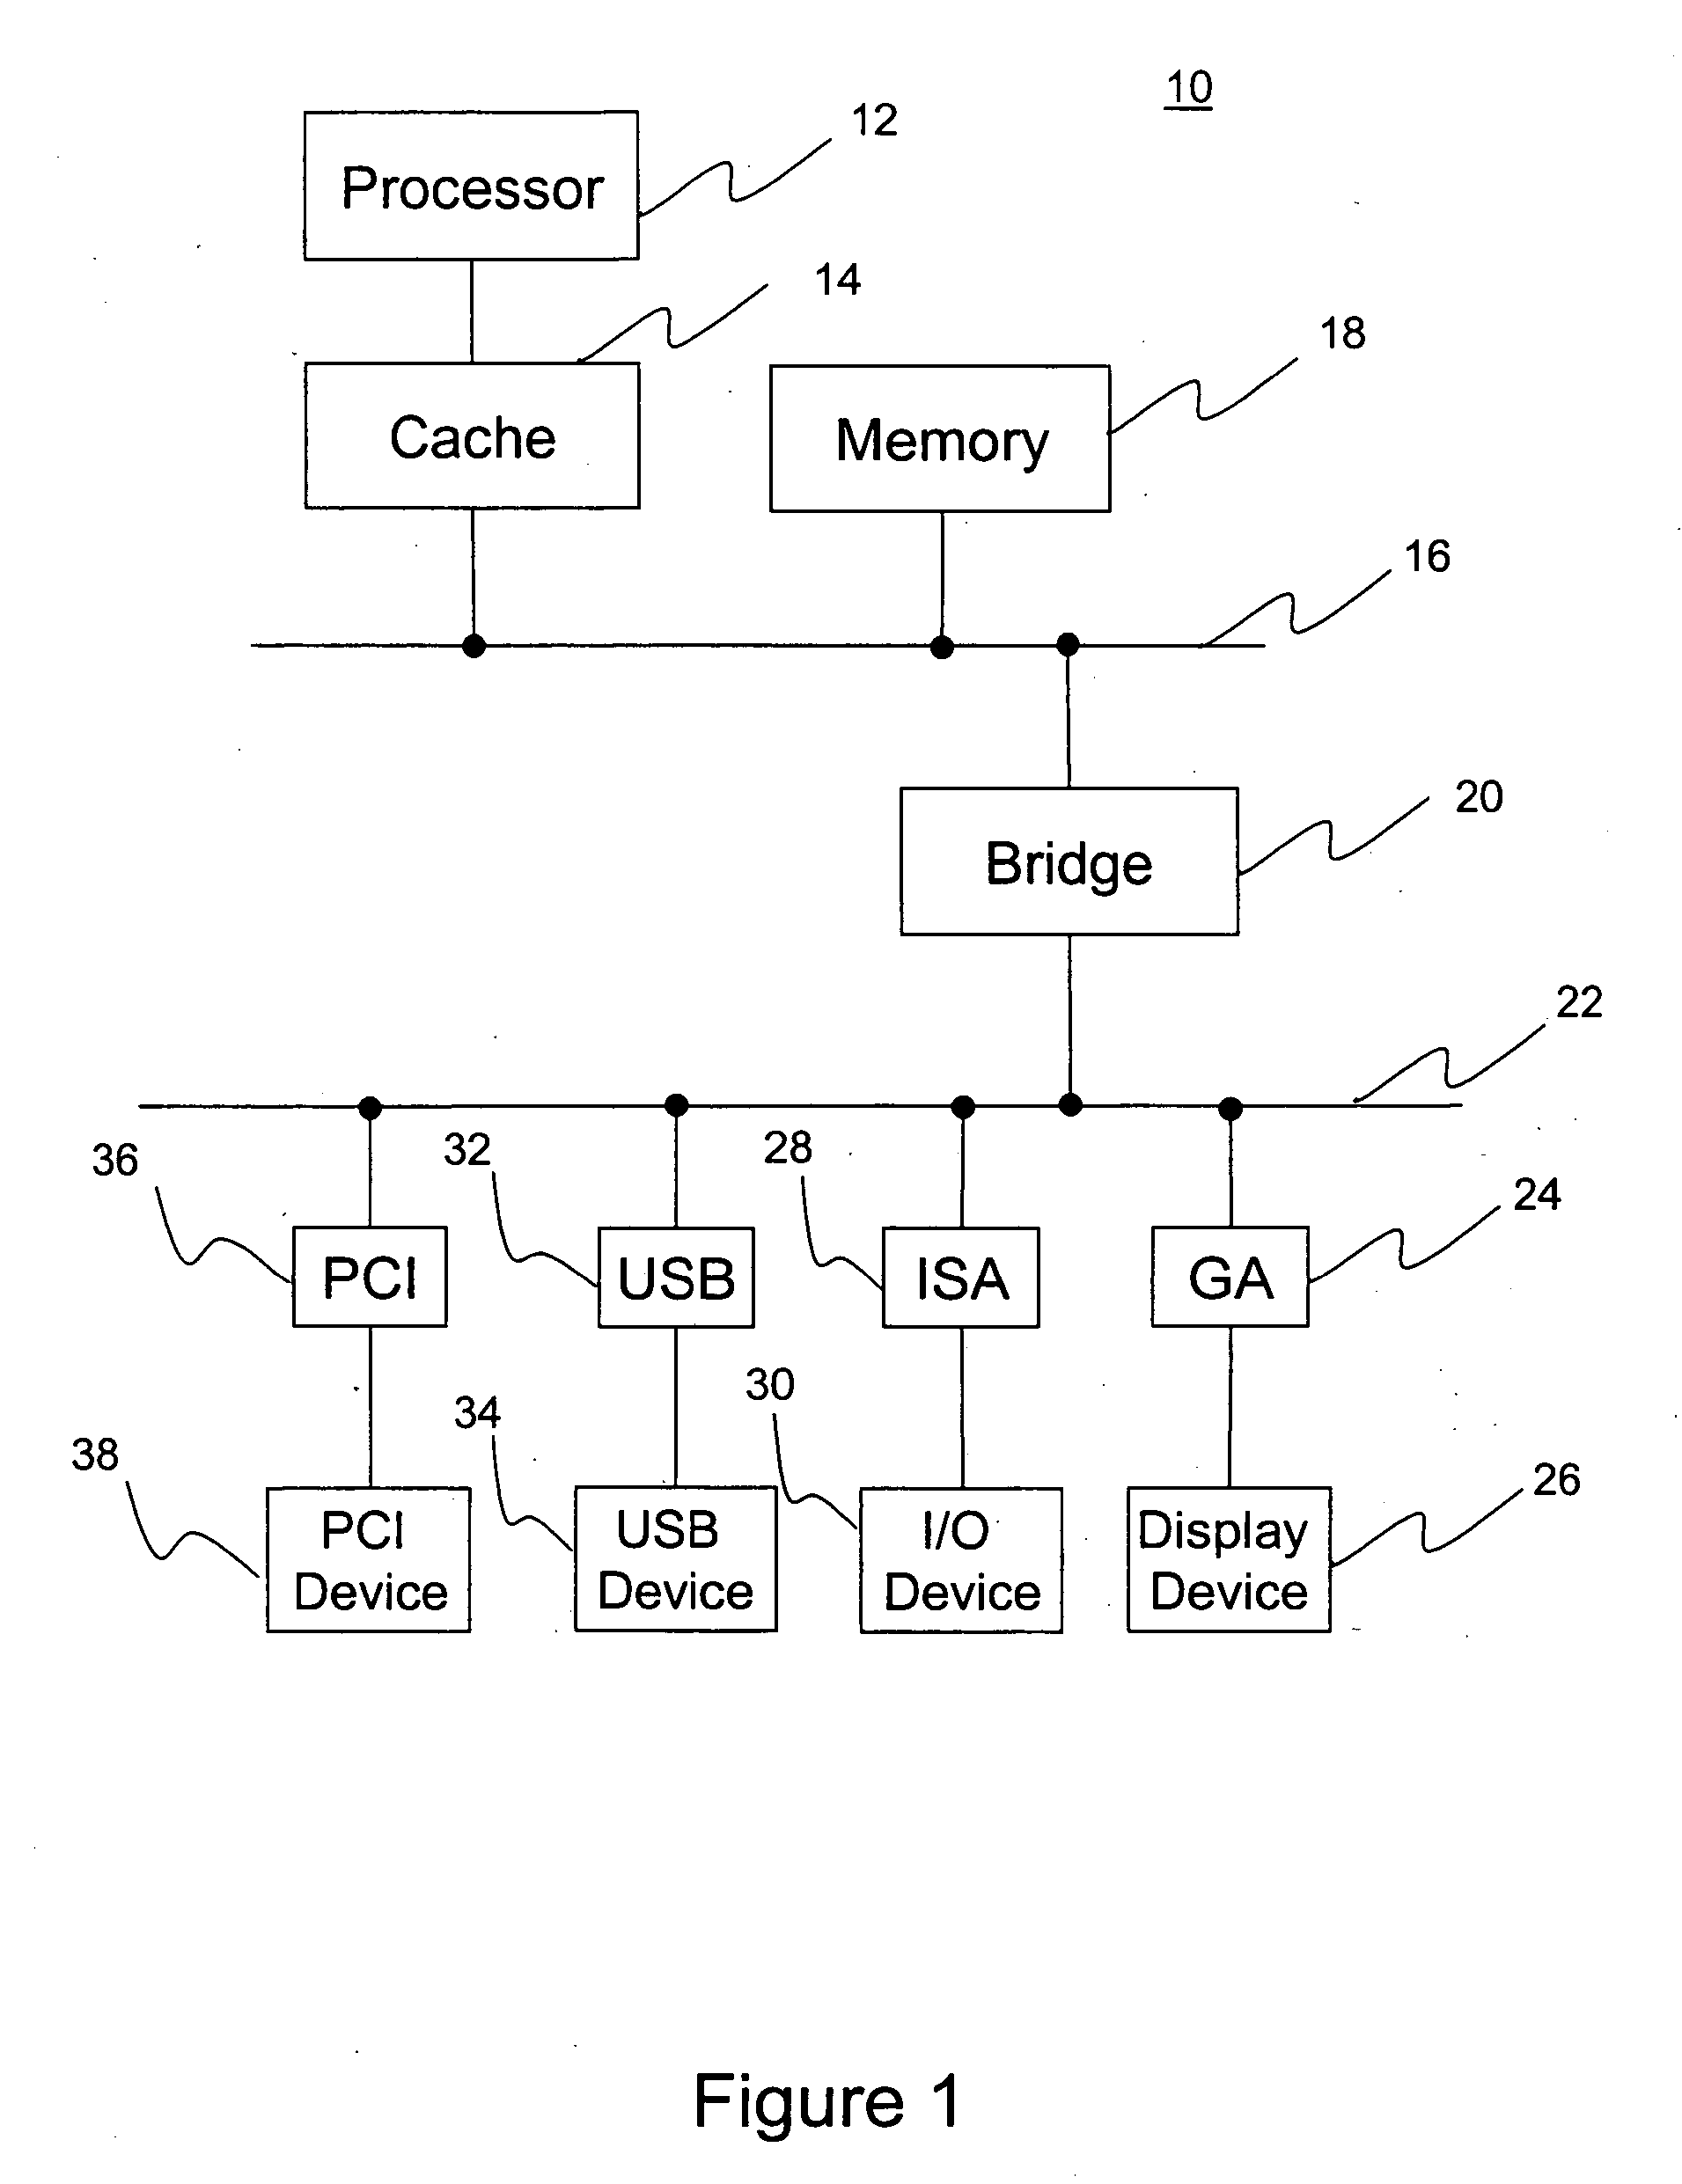 System and method for the localization of released computer program